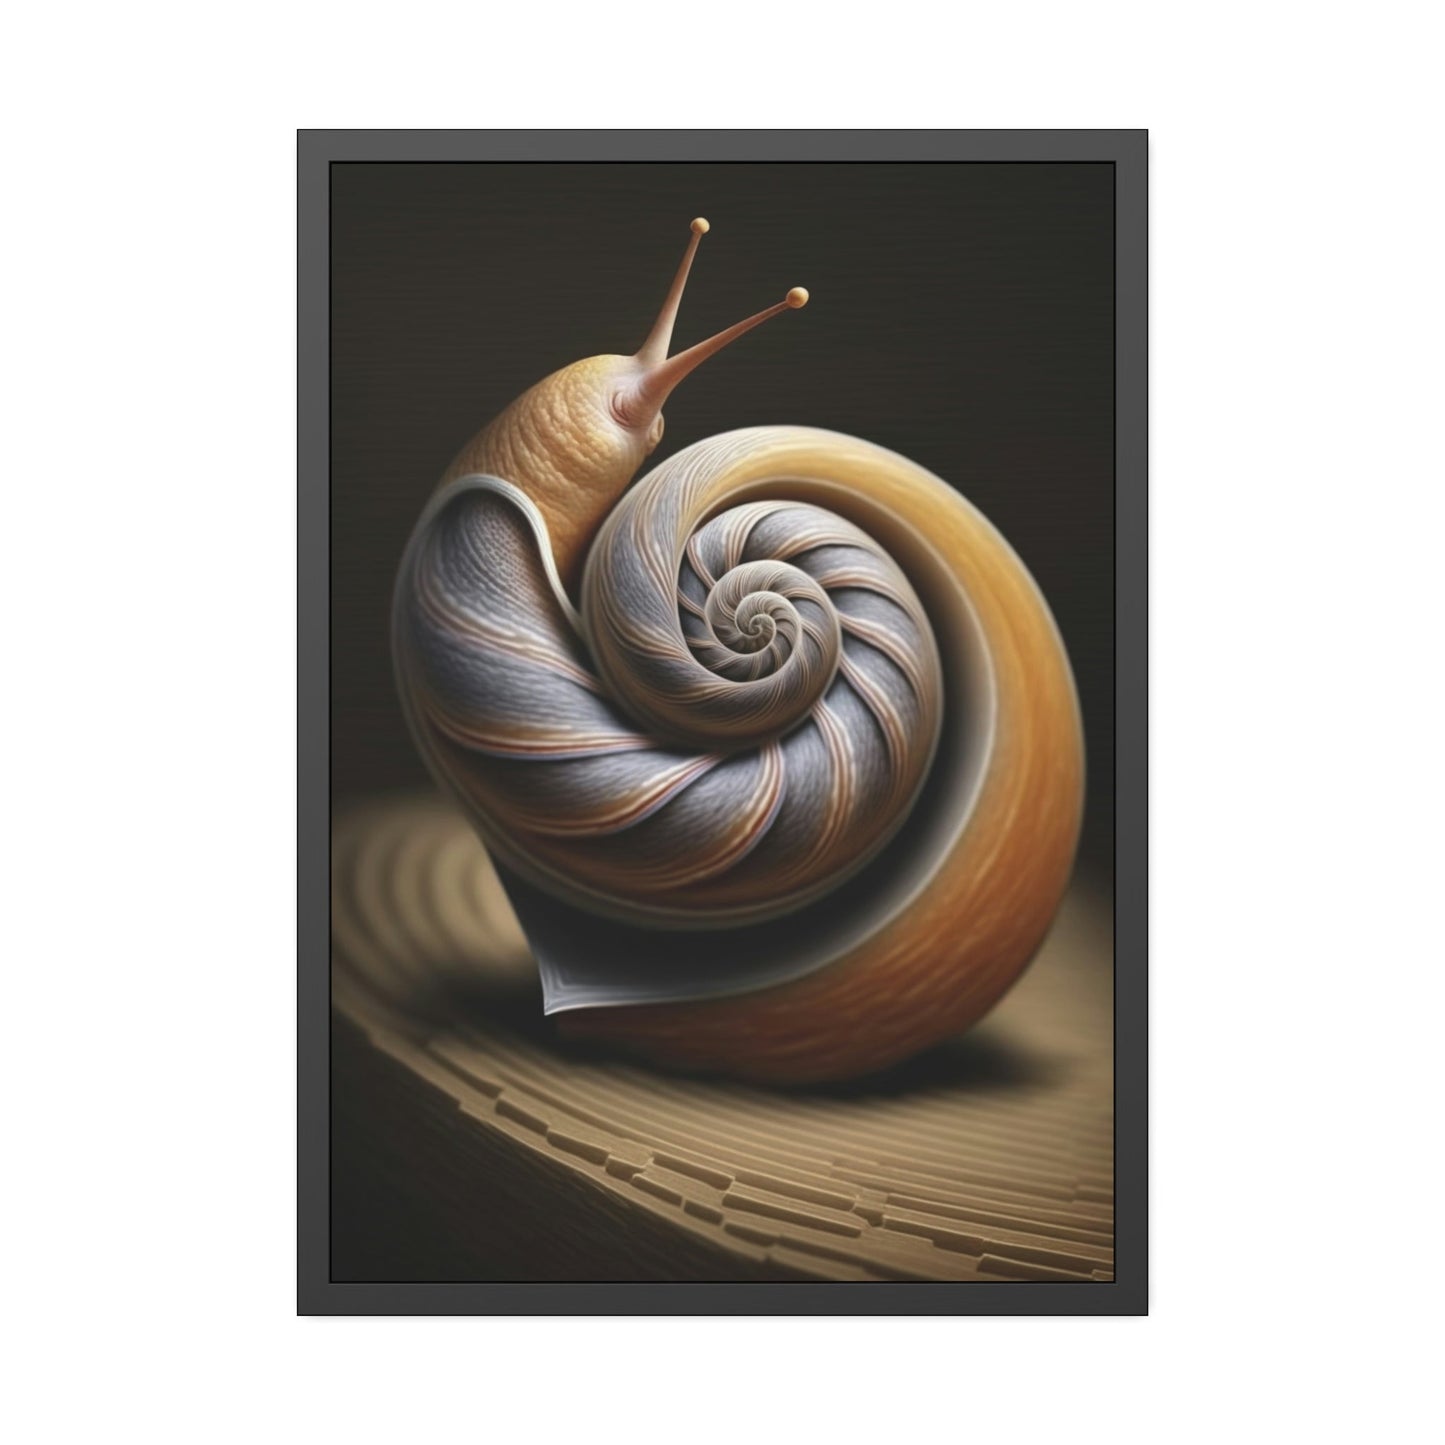 The Art of Slowing Down: Snails in Motion"